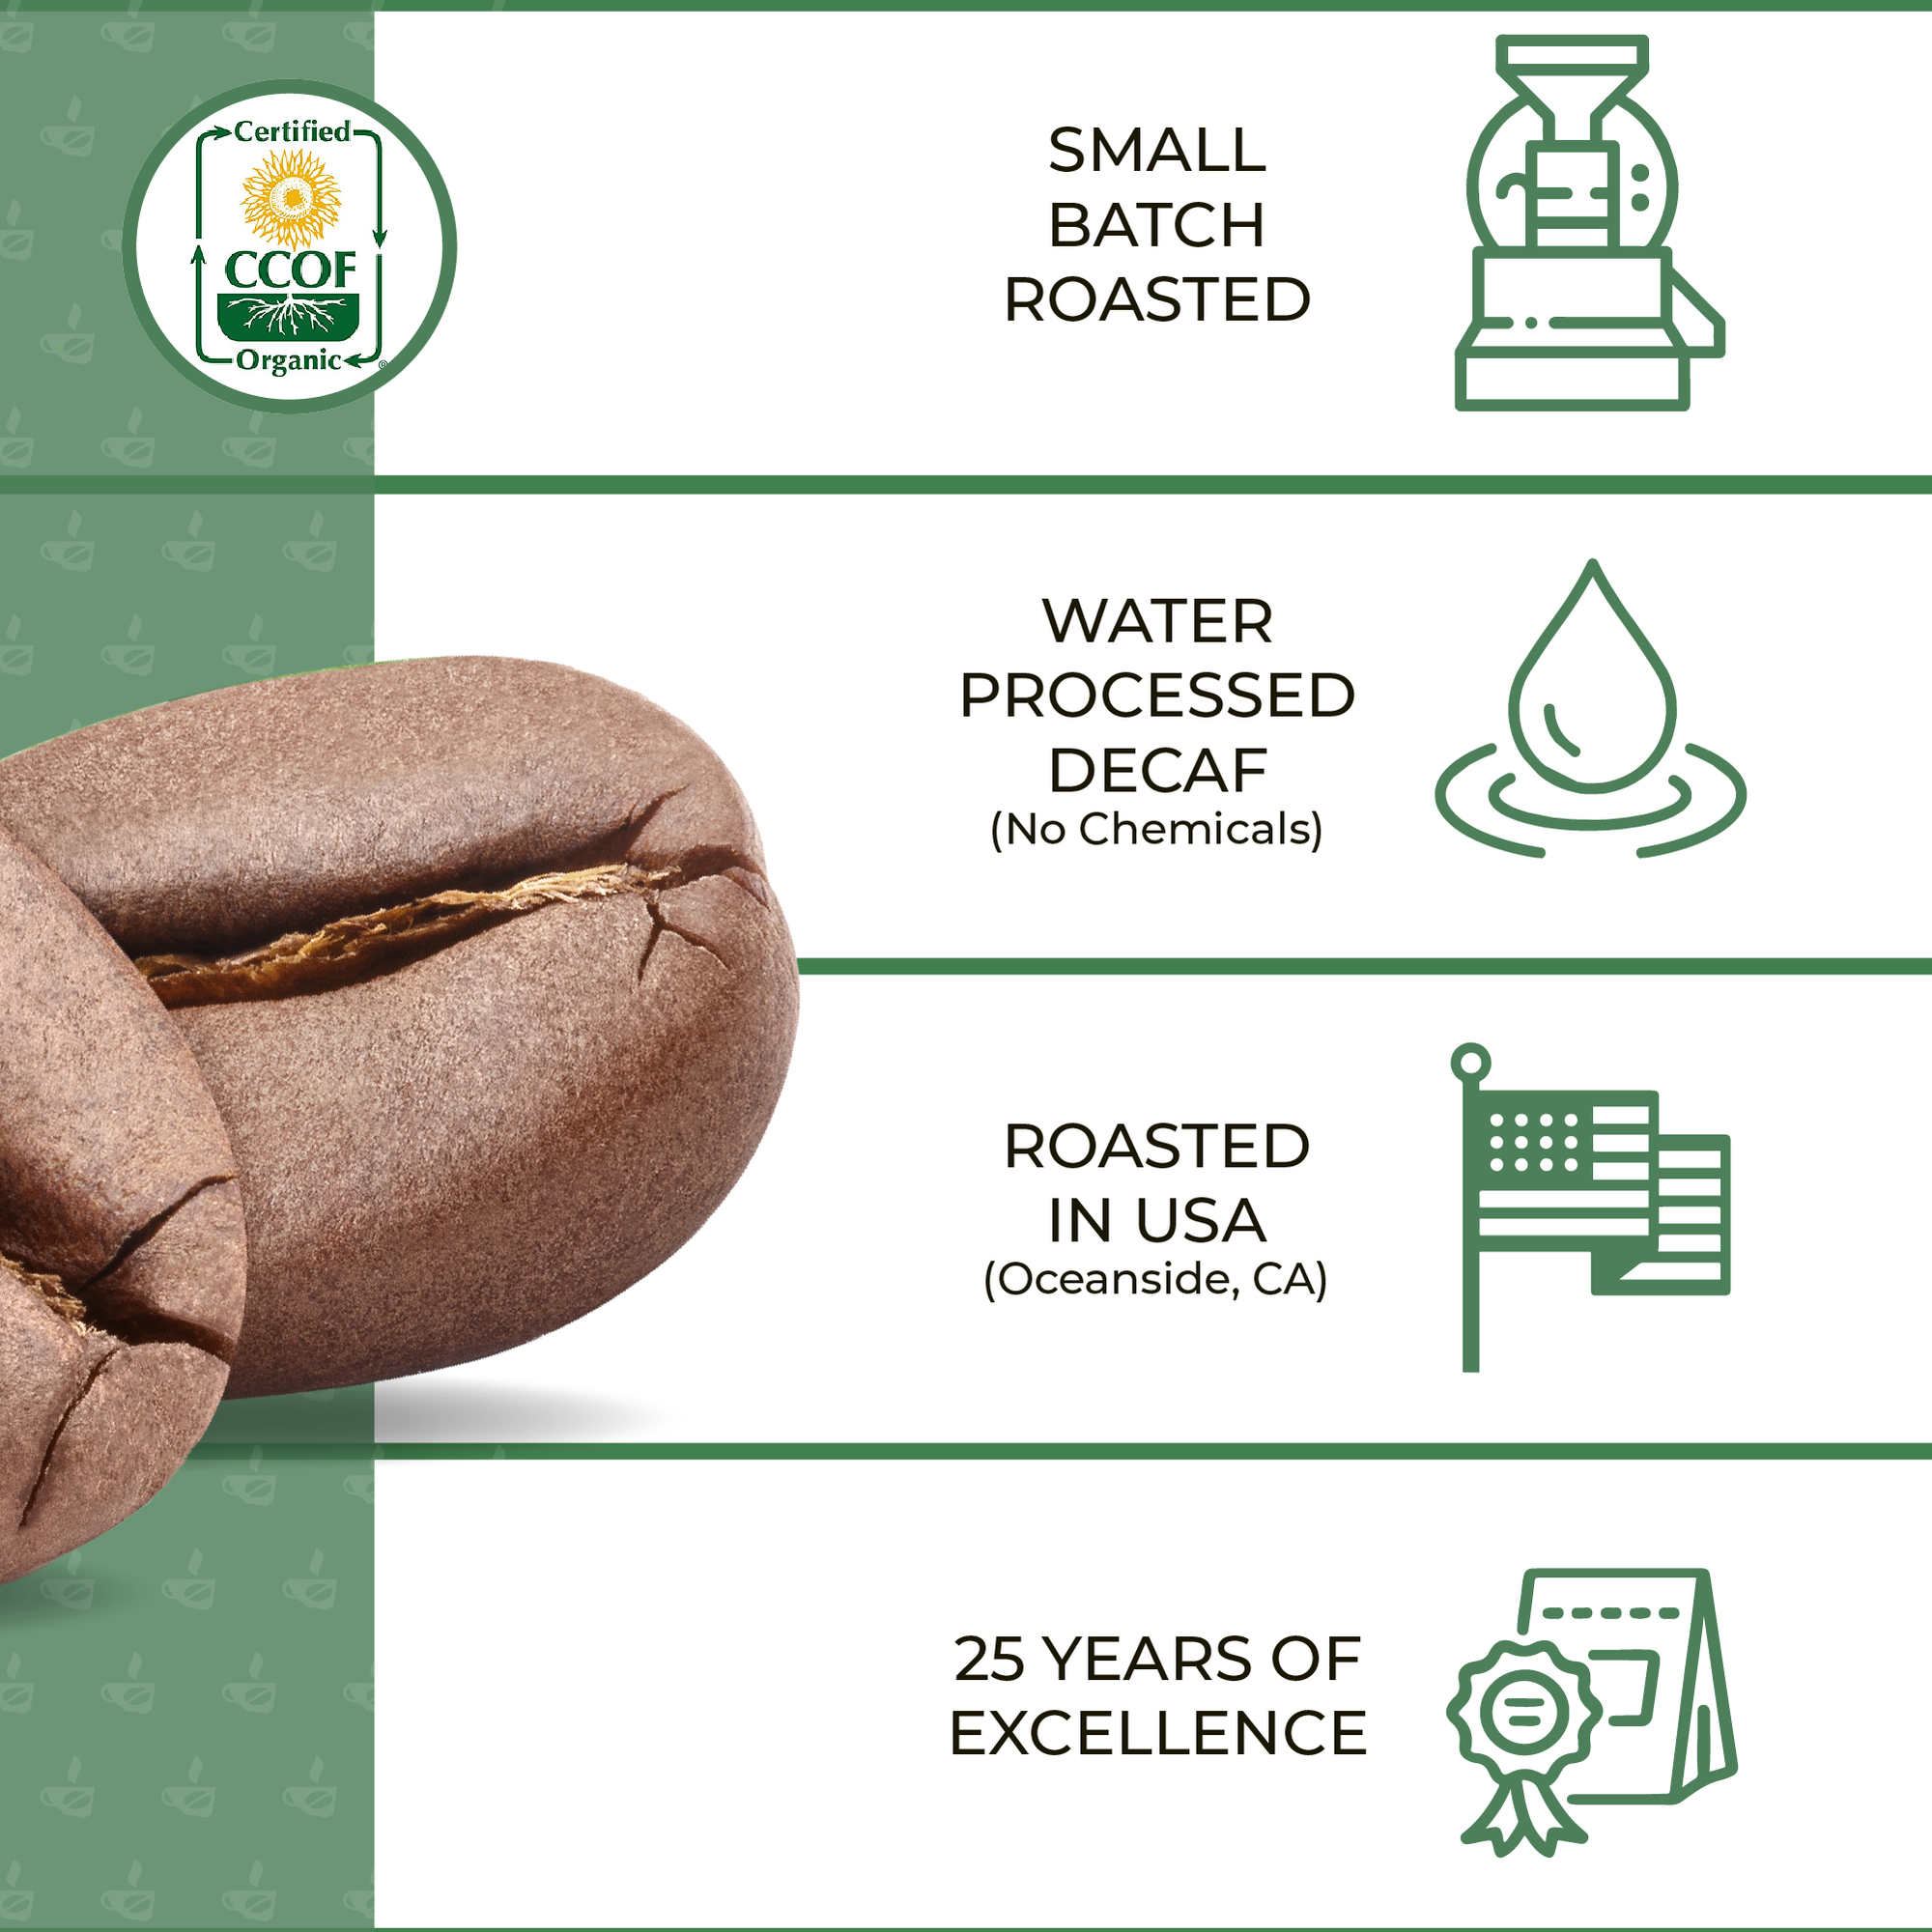 What EXACTLY is a Coffee Bean? - Procaffeination